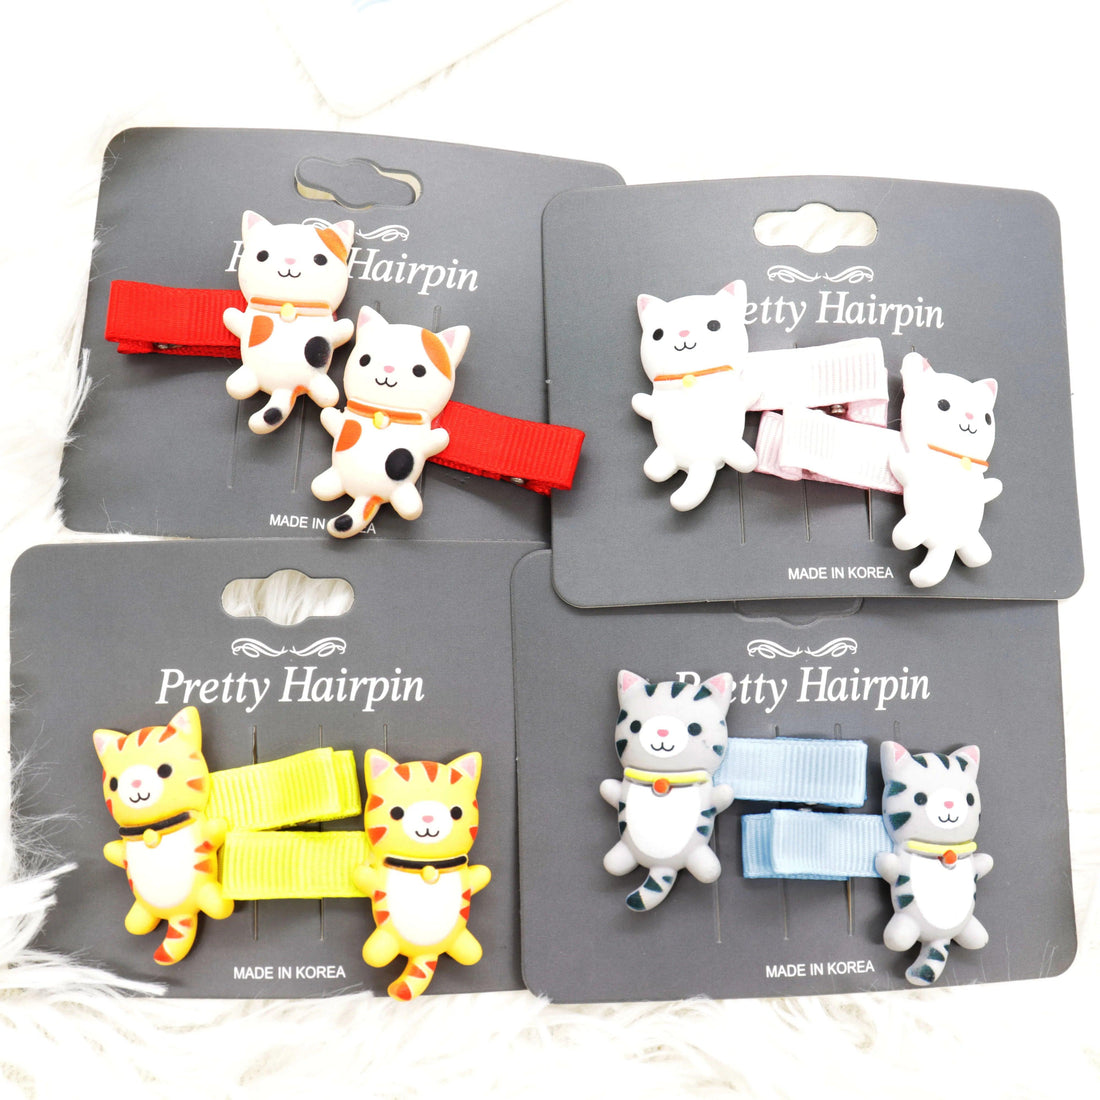 Cartoon Cat Hairpins pair, 4 colors, Minimum order 2 pairs - Just Cats - Gifts for Cat Lovers